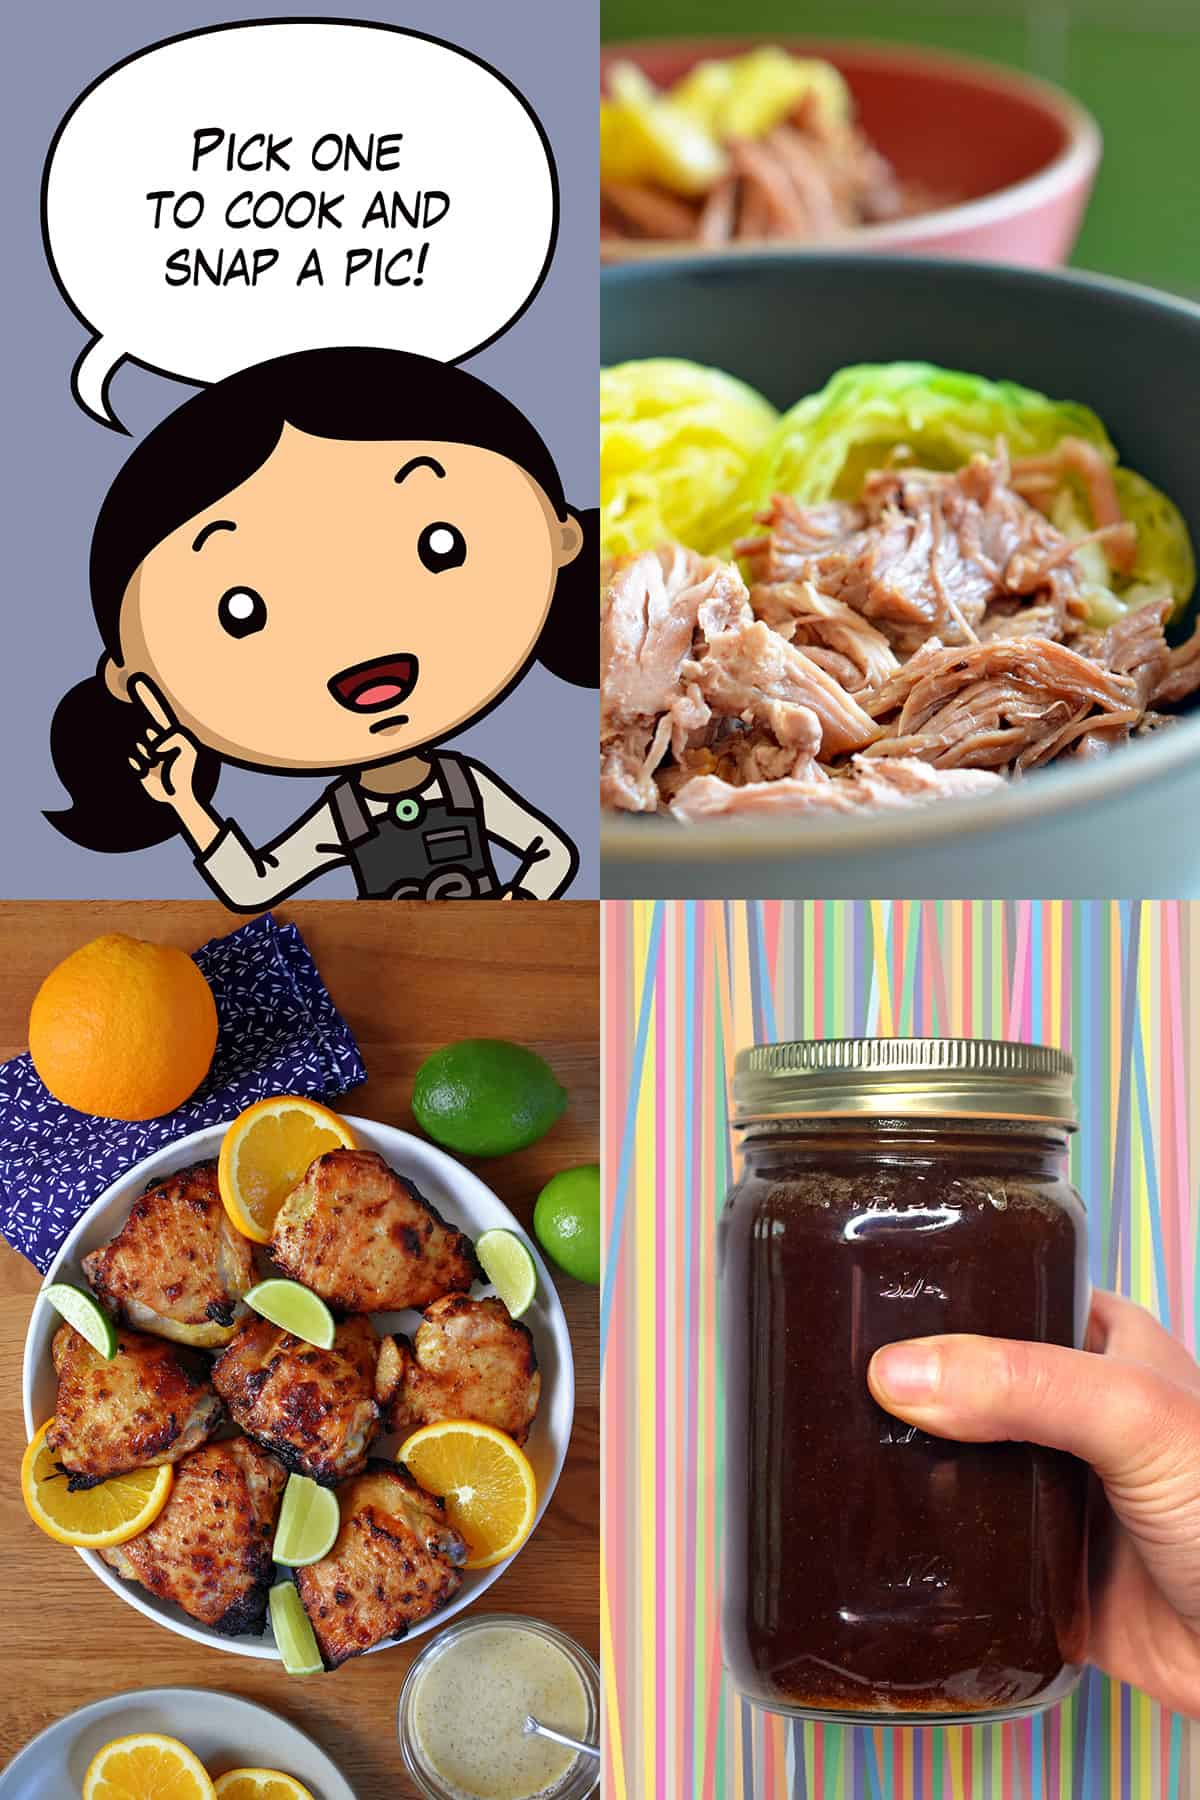 A cartoon Michelle Tam is telling folks to cook one of the January cooking challenge recipes (Instant Pot Kalua Pig, Mojo Chicken or All-Purpose Stir-Fry Sauce) and take a picture of the dish.